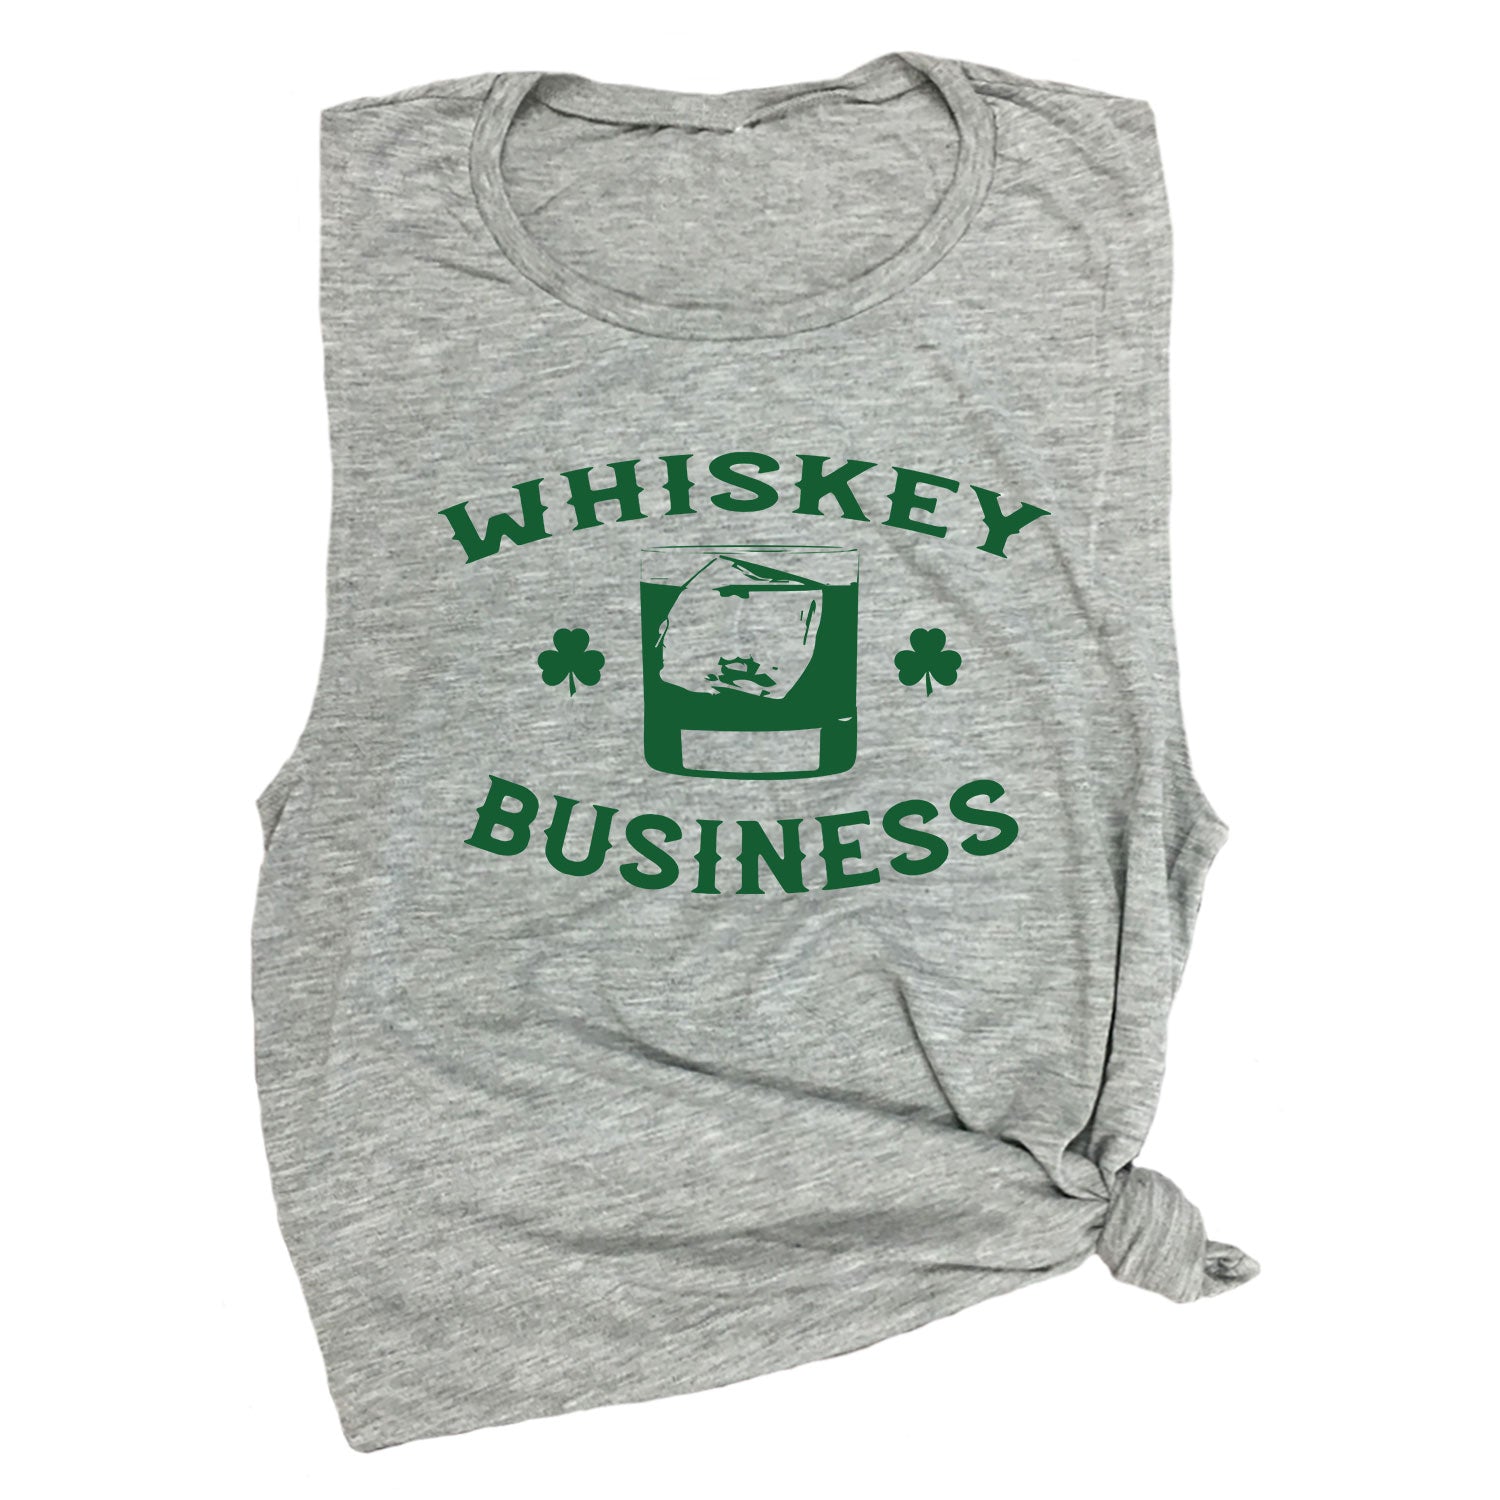 Whiskey Business Muscle Tee